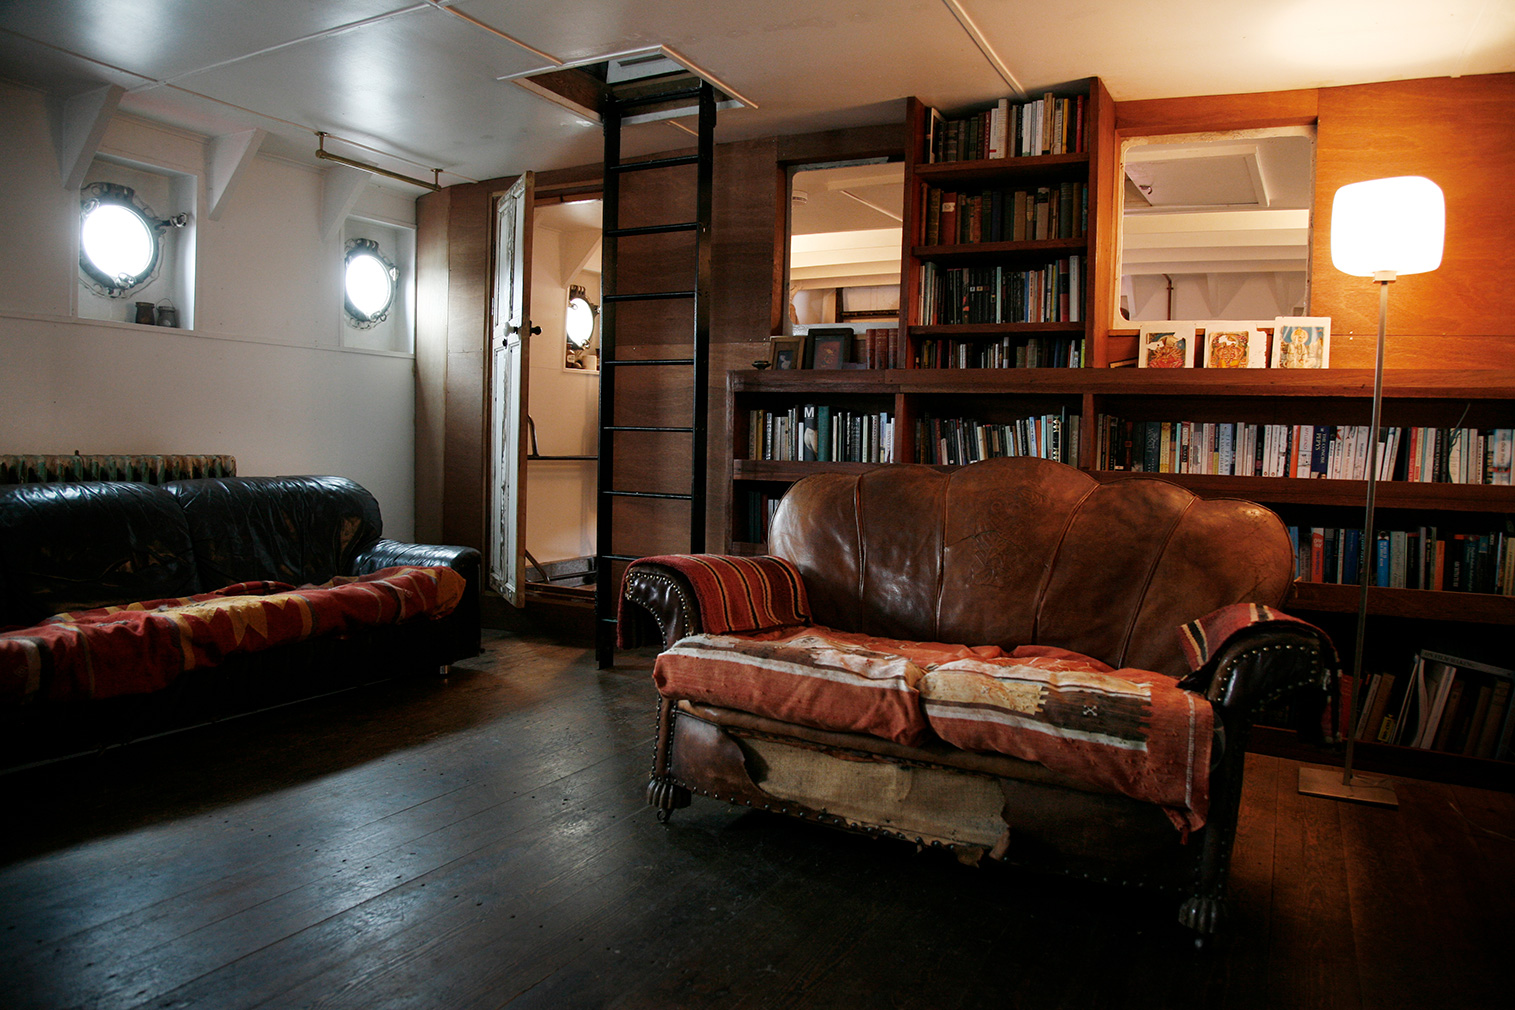 Floating home Light Vessel 93 is for sale in east London